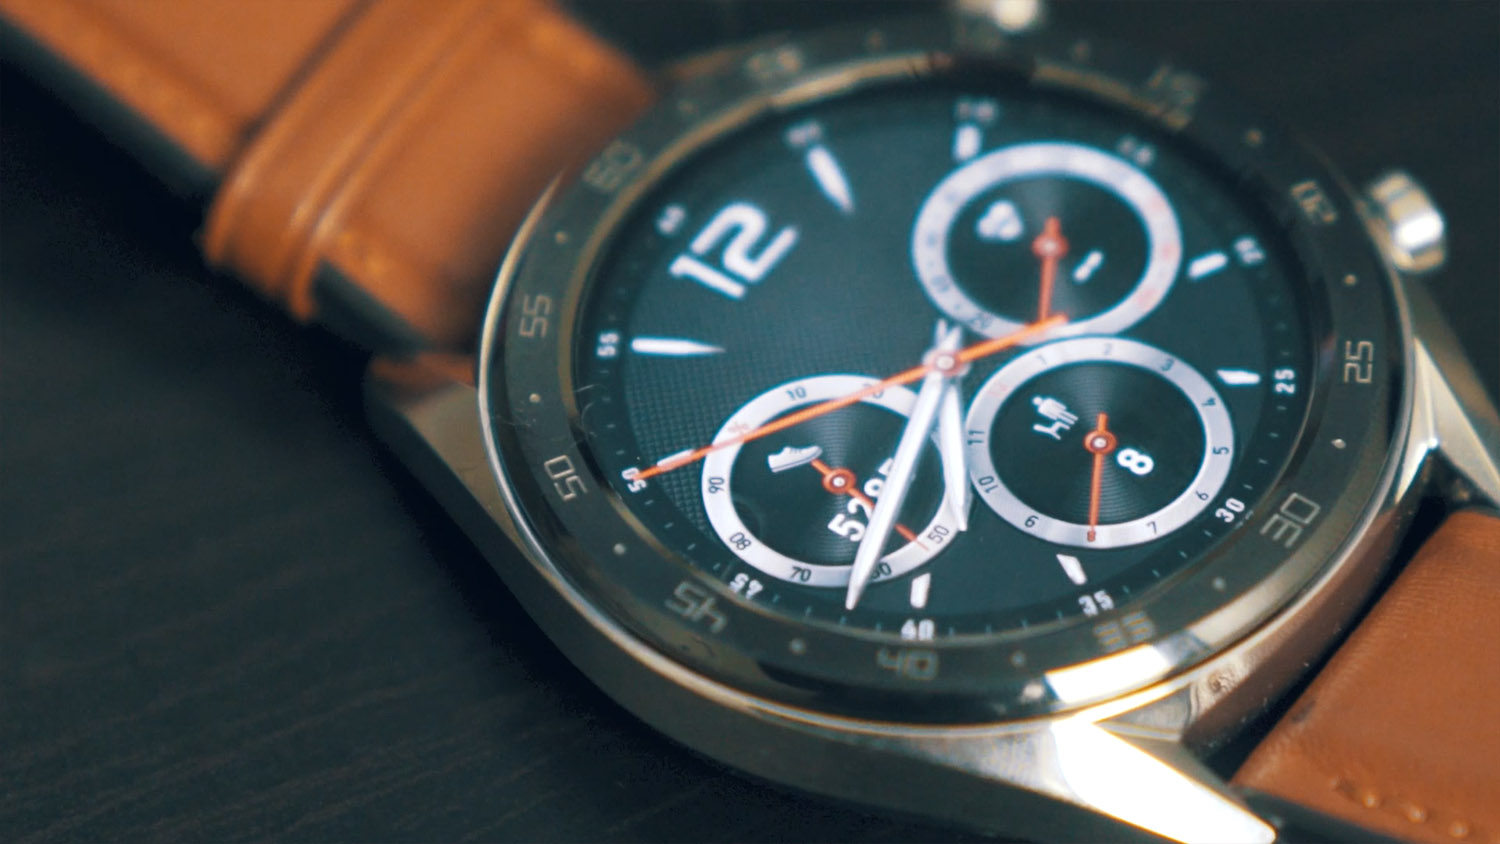 Huawei Watch GT gets even with always on display update – Phandroid